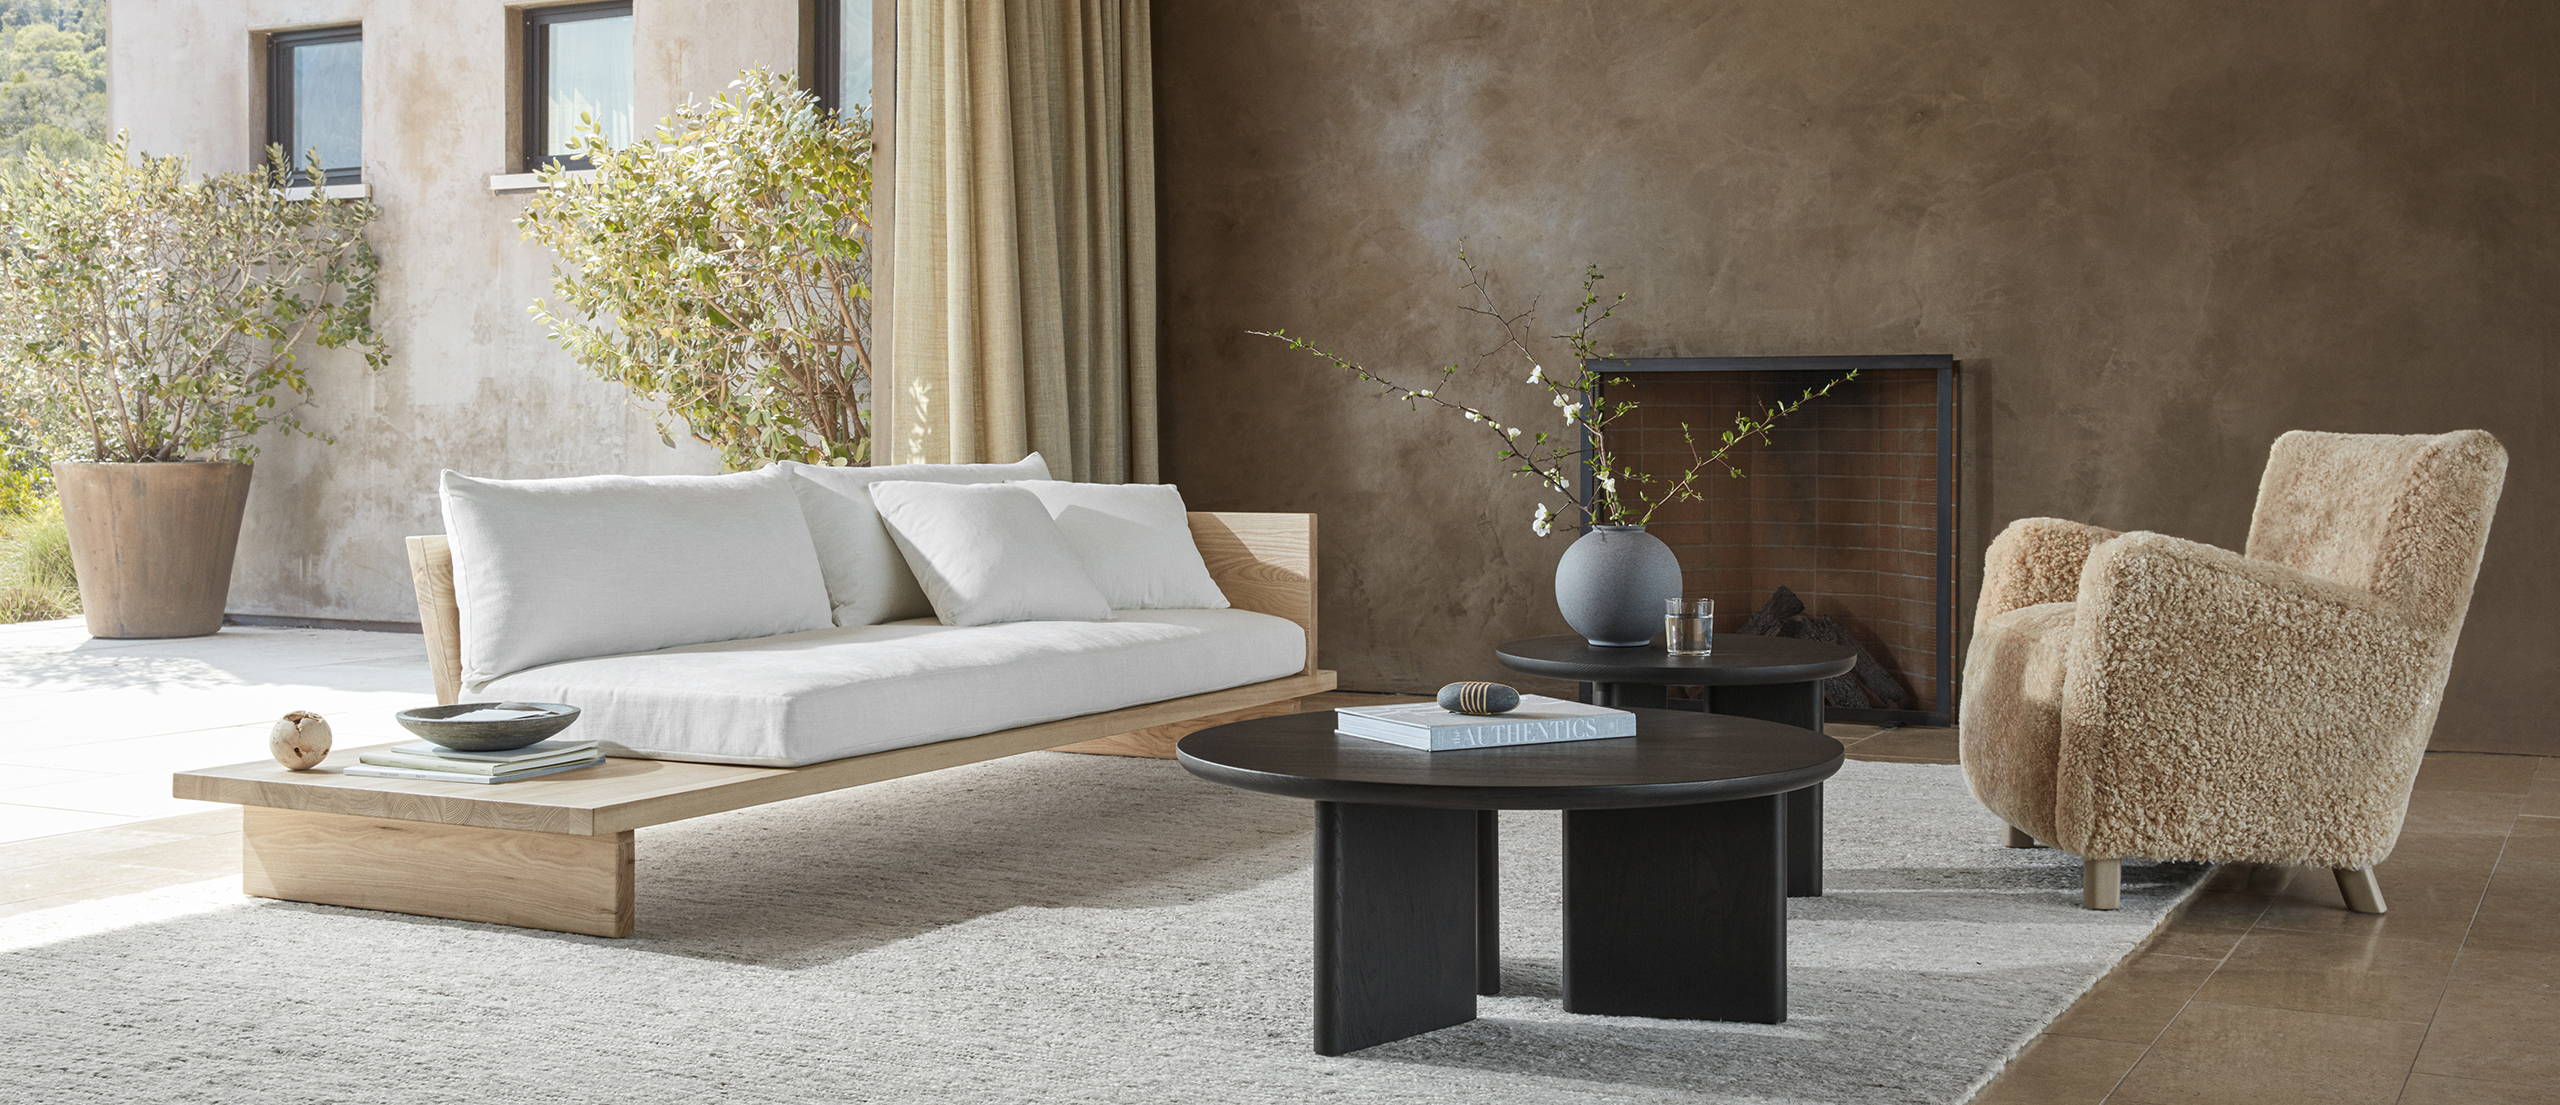 A living room furnished with a Muir sofa in Alabaster performance chenille and natural ash finish, a large and medium Morro table in Charcoal, and a Perry chair in Sandstone shearling.